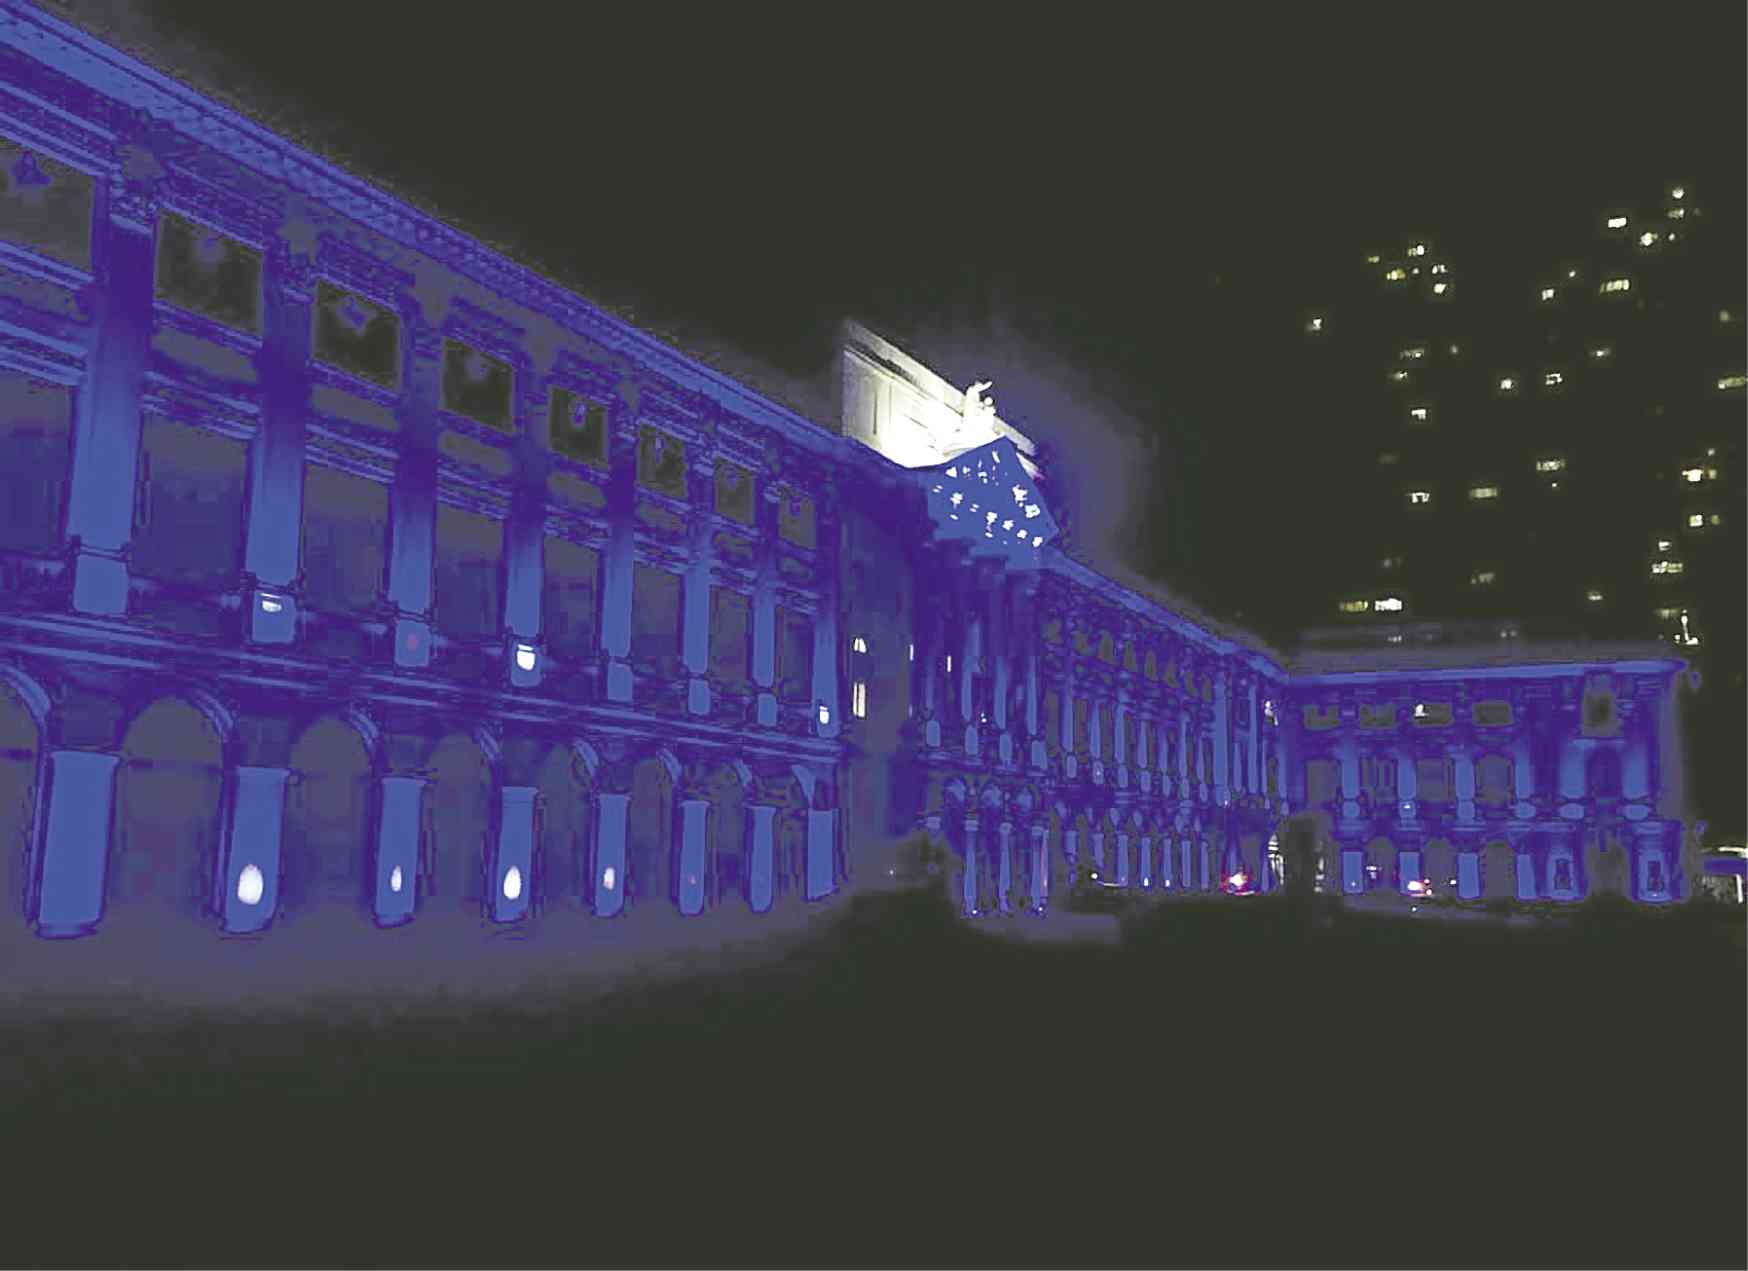 The inside story: How La Salle lit up in blue | Inquirer Lifestyle